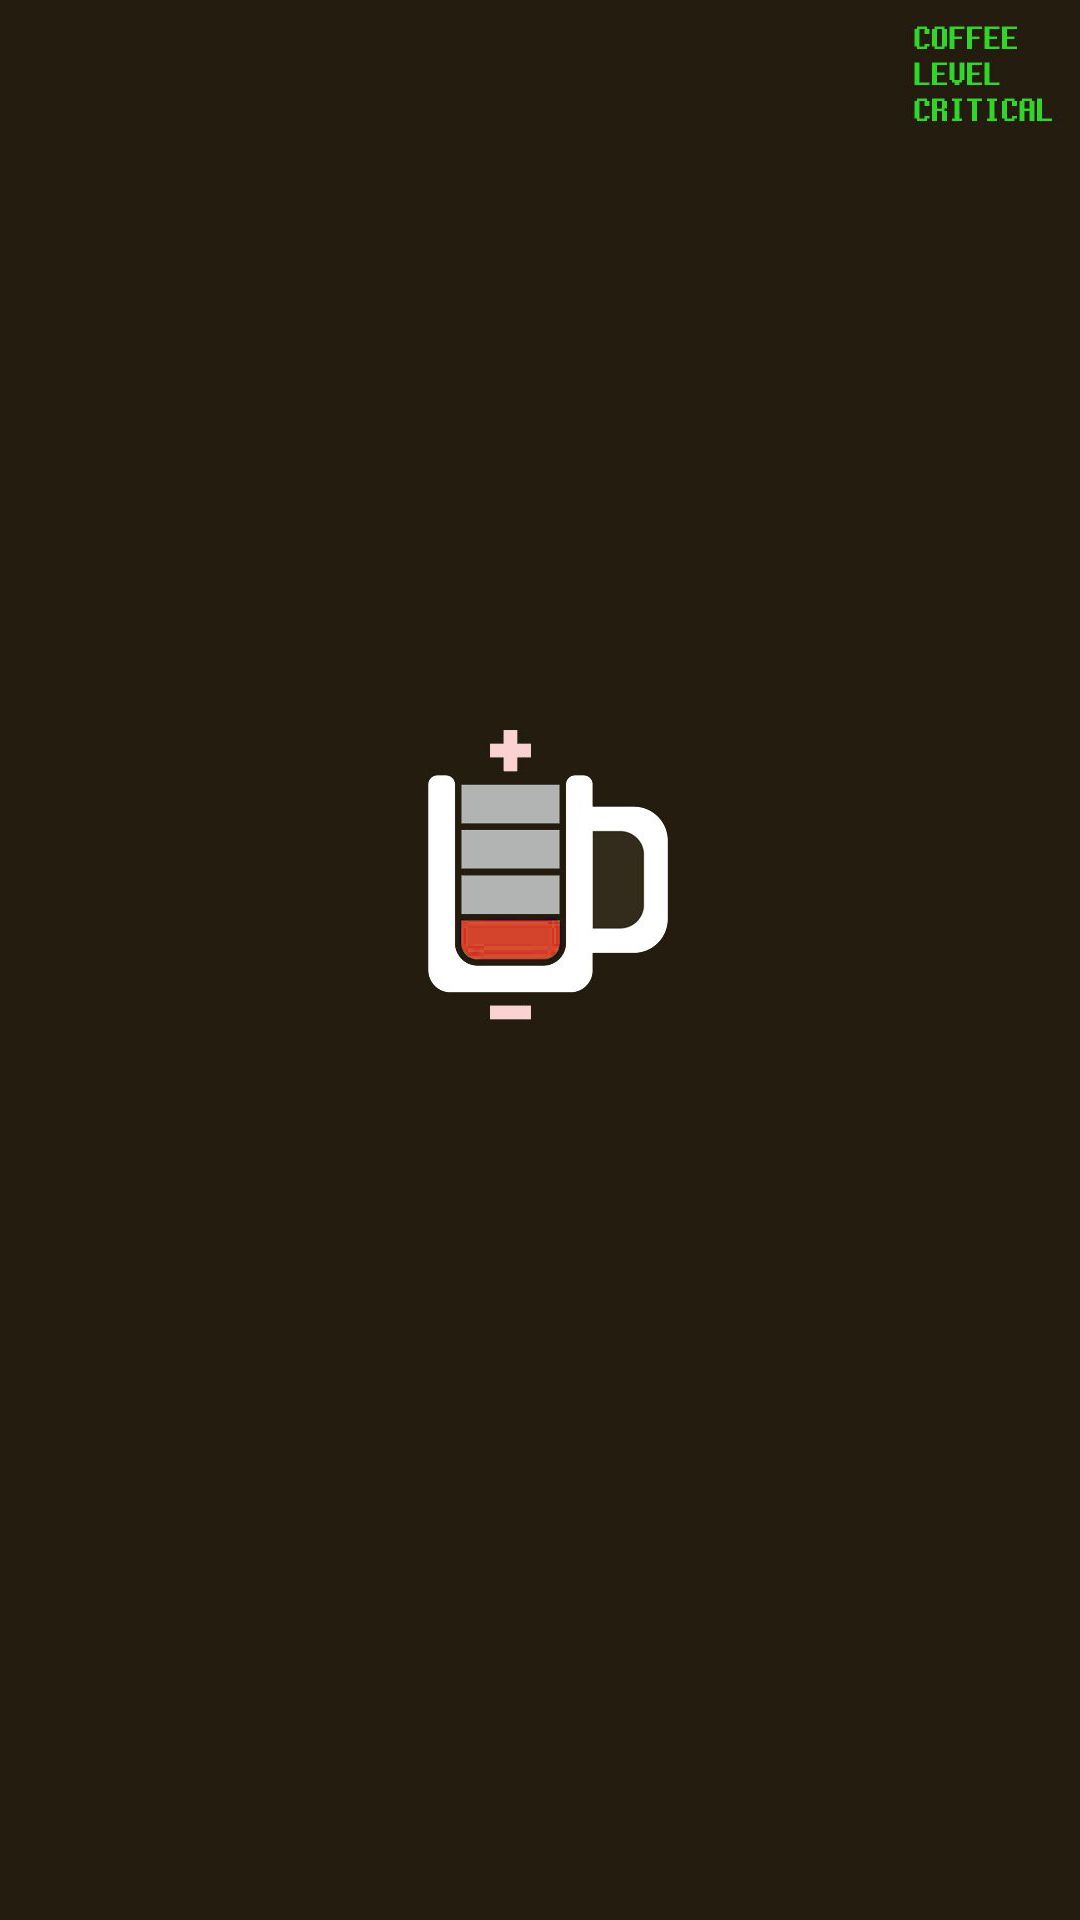 Minimalistic coffee wallpaper for your phone. - Coffee